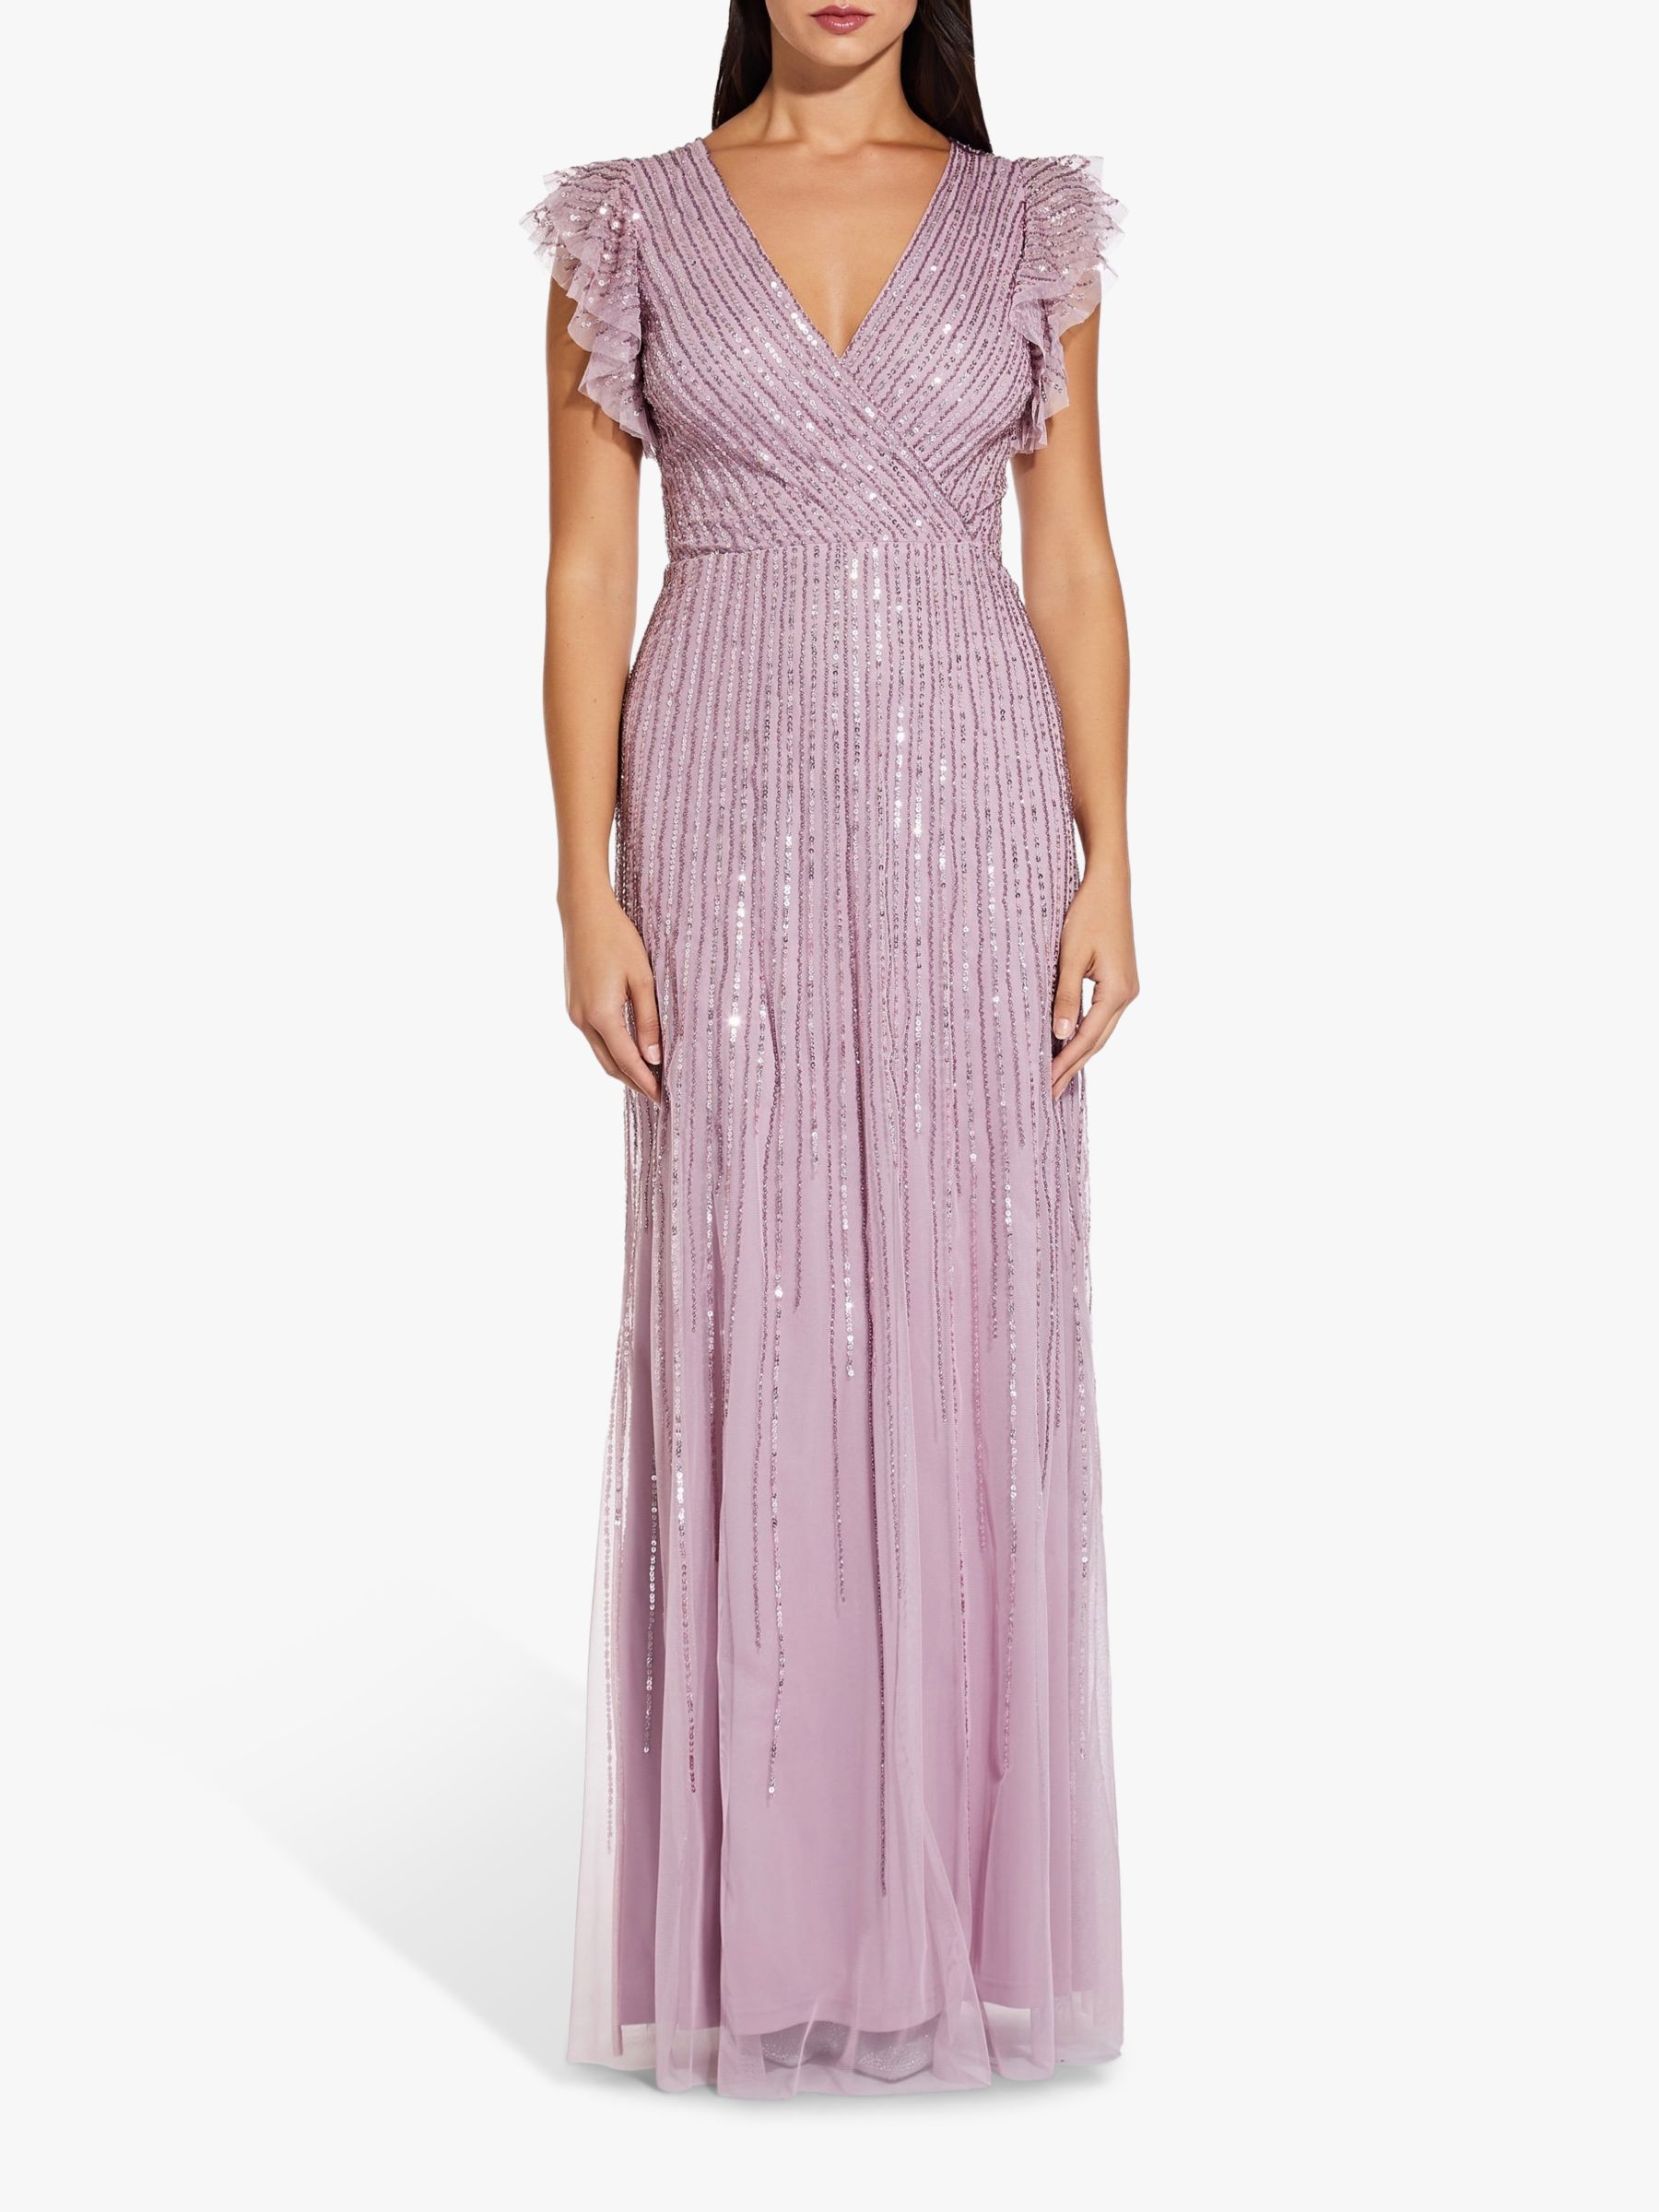 Adrianna Papell Beaded Flutter Gown, Moonlight Lilac